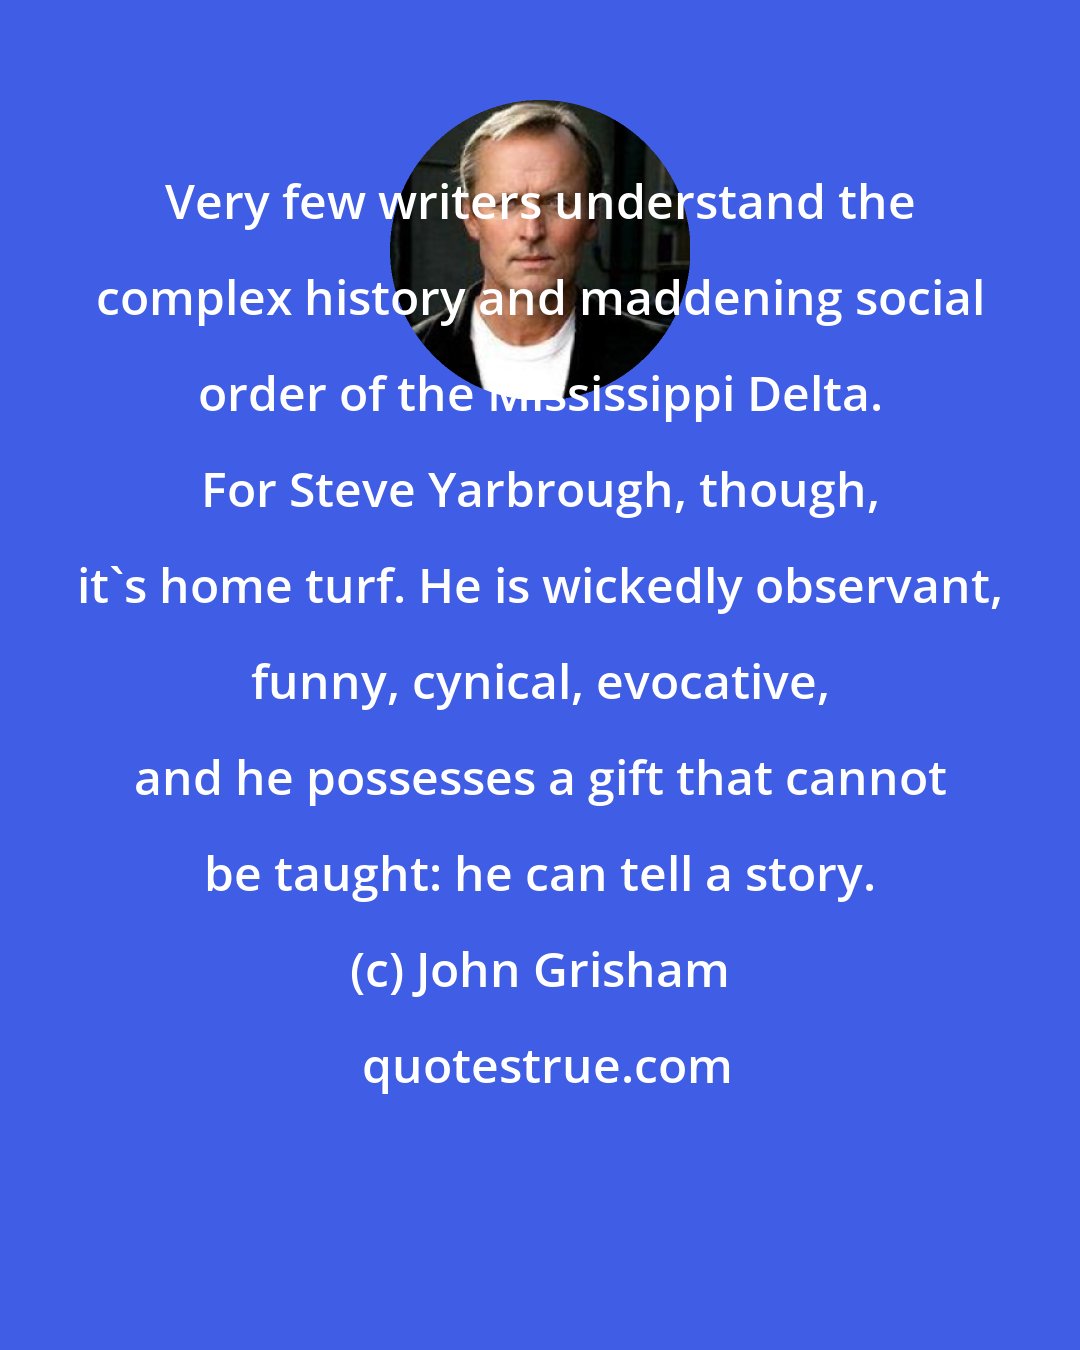 John Grisham: Very few writers understand the complex history and maddening social order of the Mississippi Delta. For Steve Yarbrough, though, it's home turf. He is wickedly observant, funny, cynical, evocative, and he possesses a gift that cannot be taught: he can tell a story.